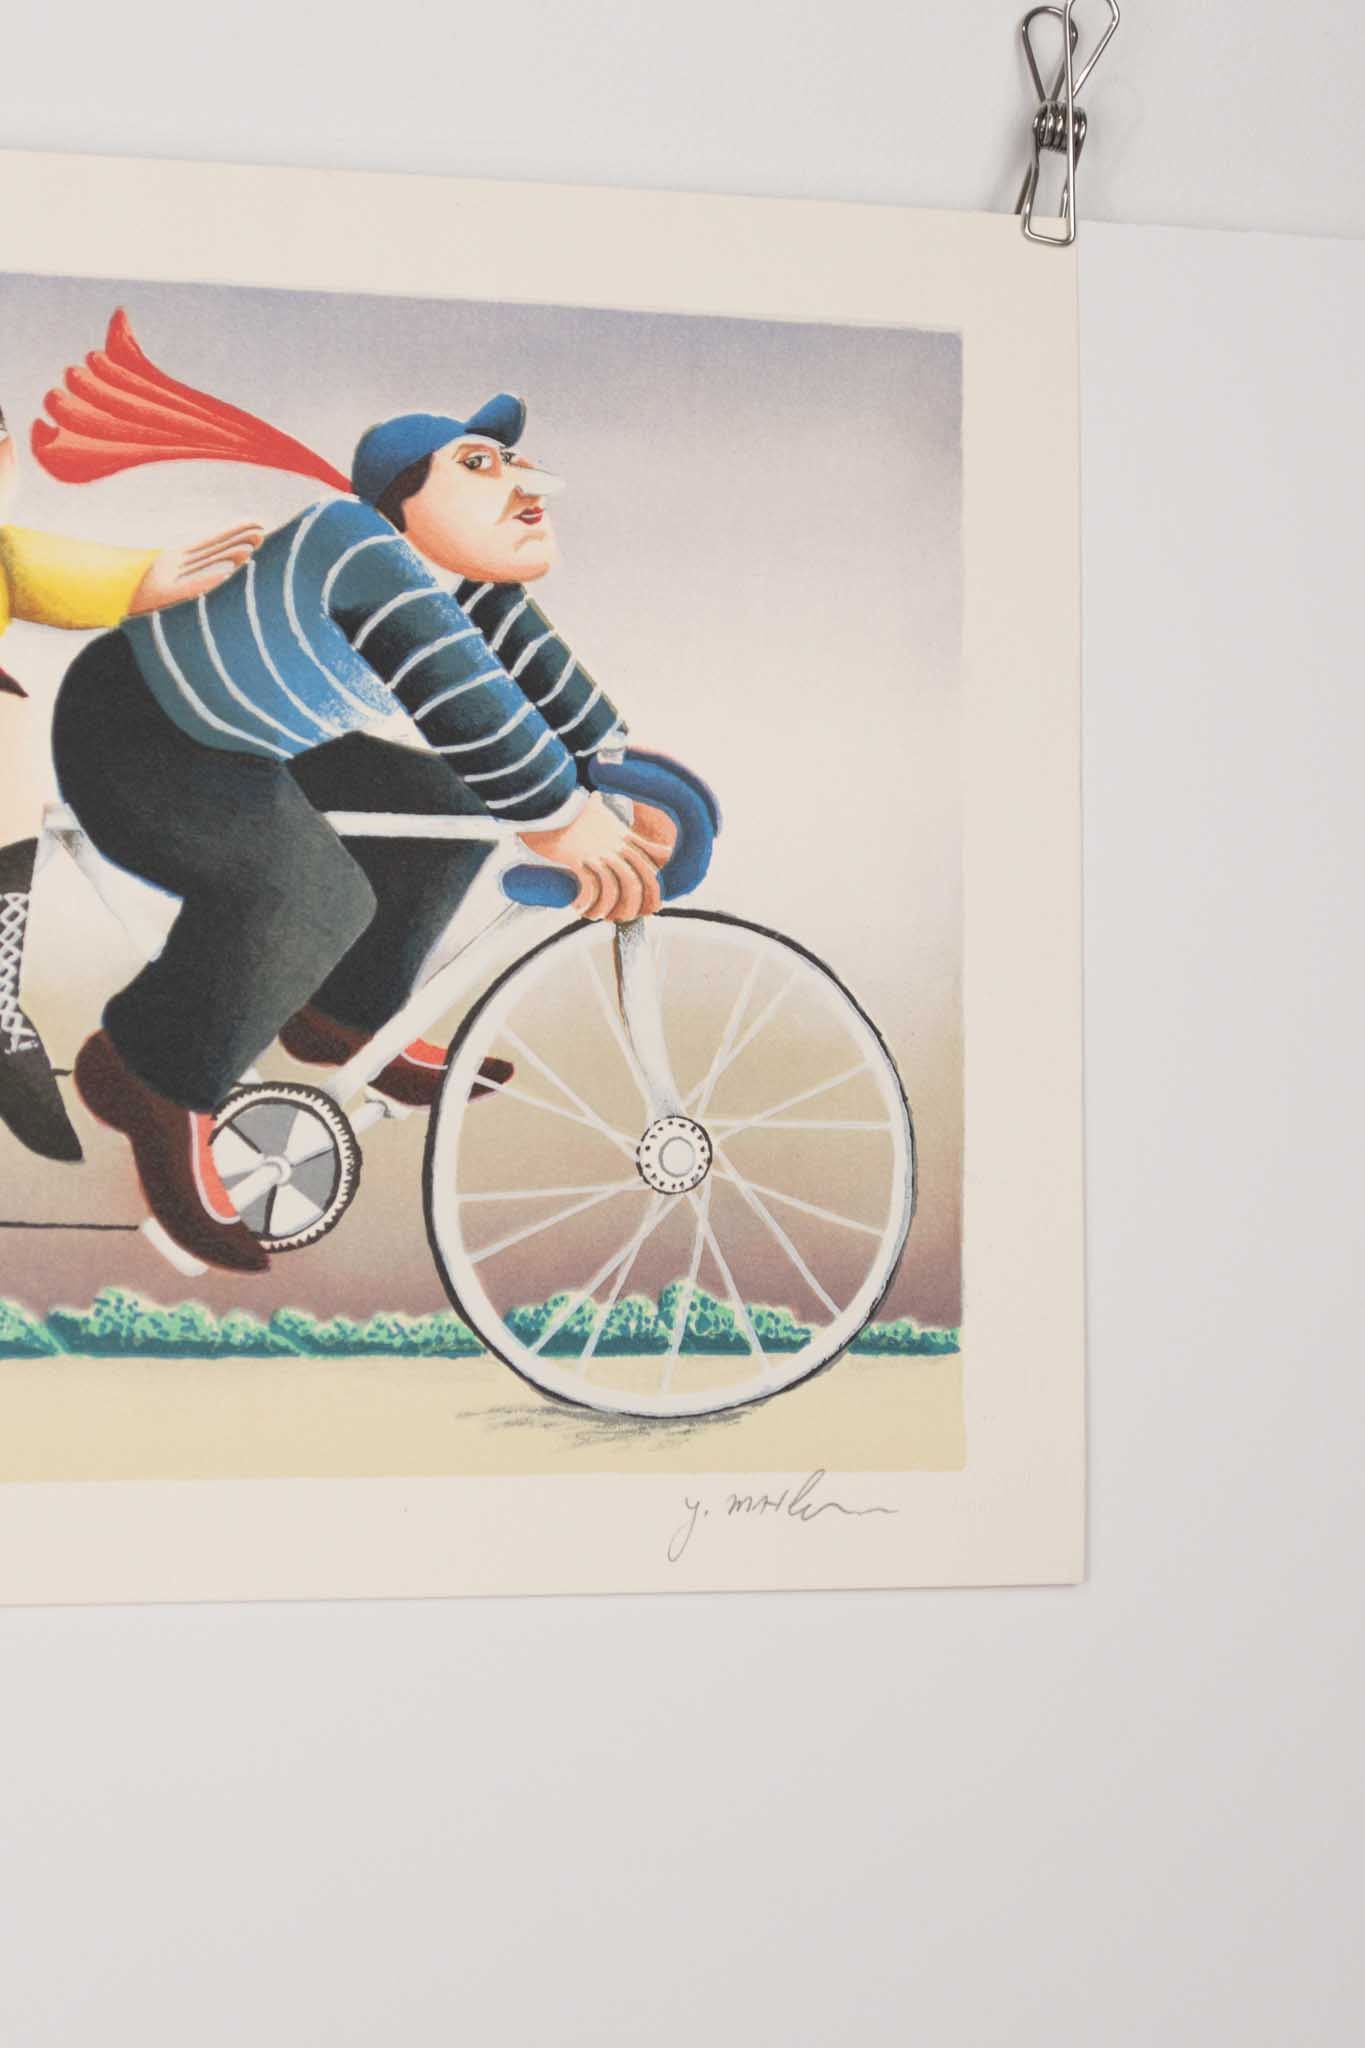 Yuval Mahler "Everyone is on the Bike" Lithograph Print